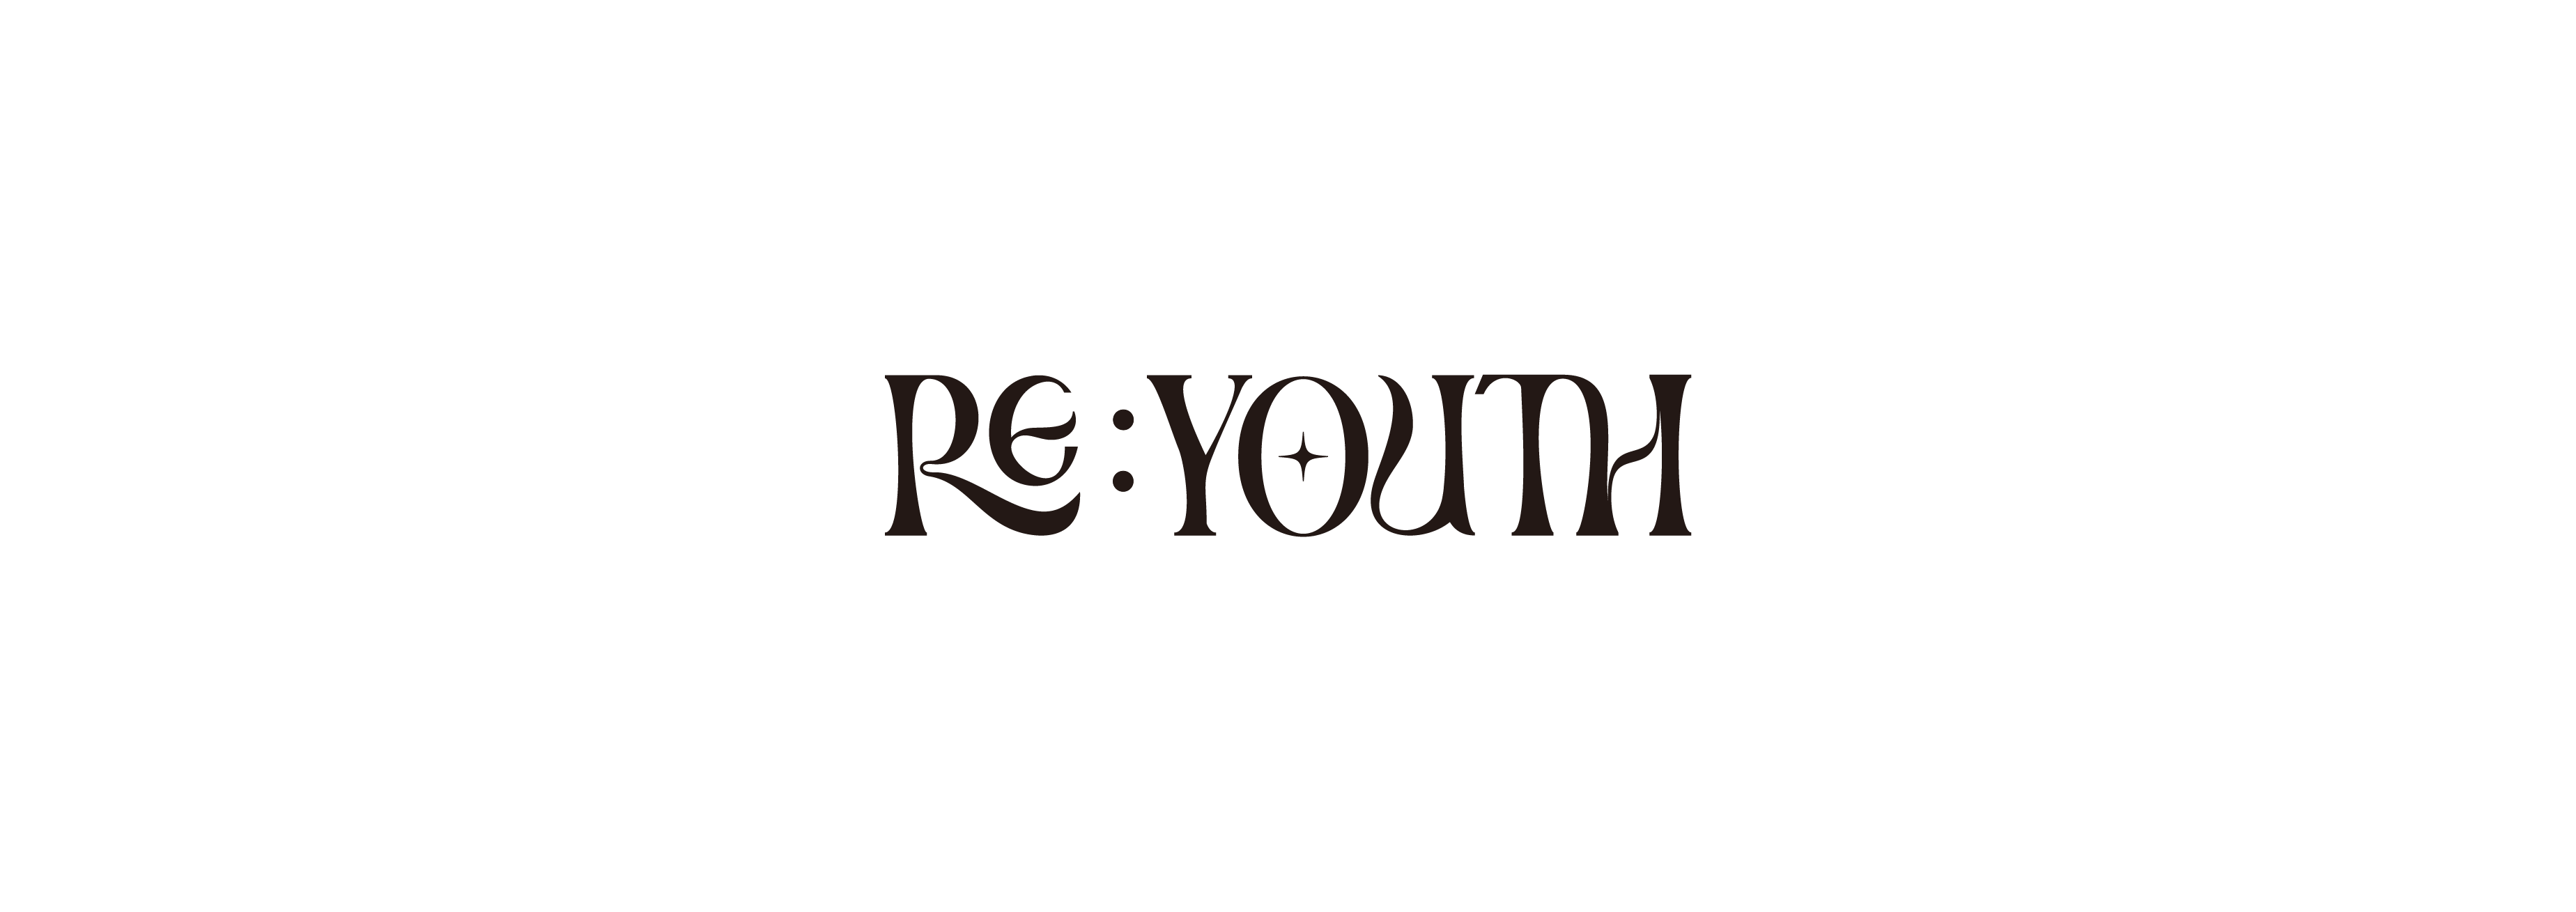 re:youth